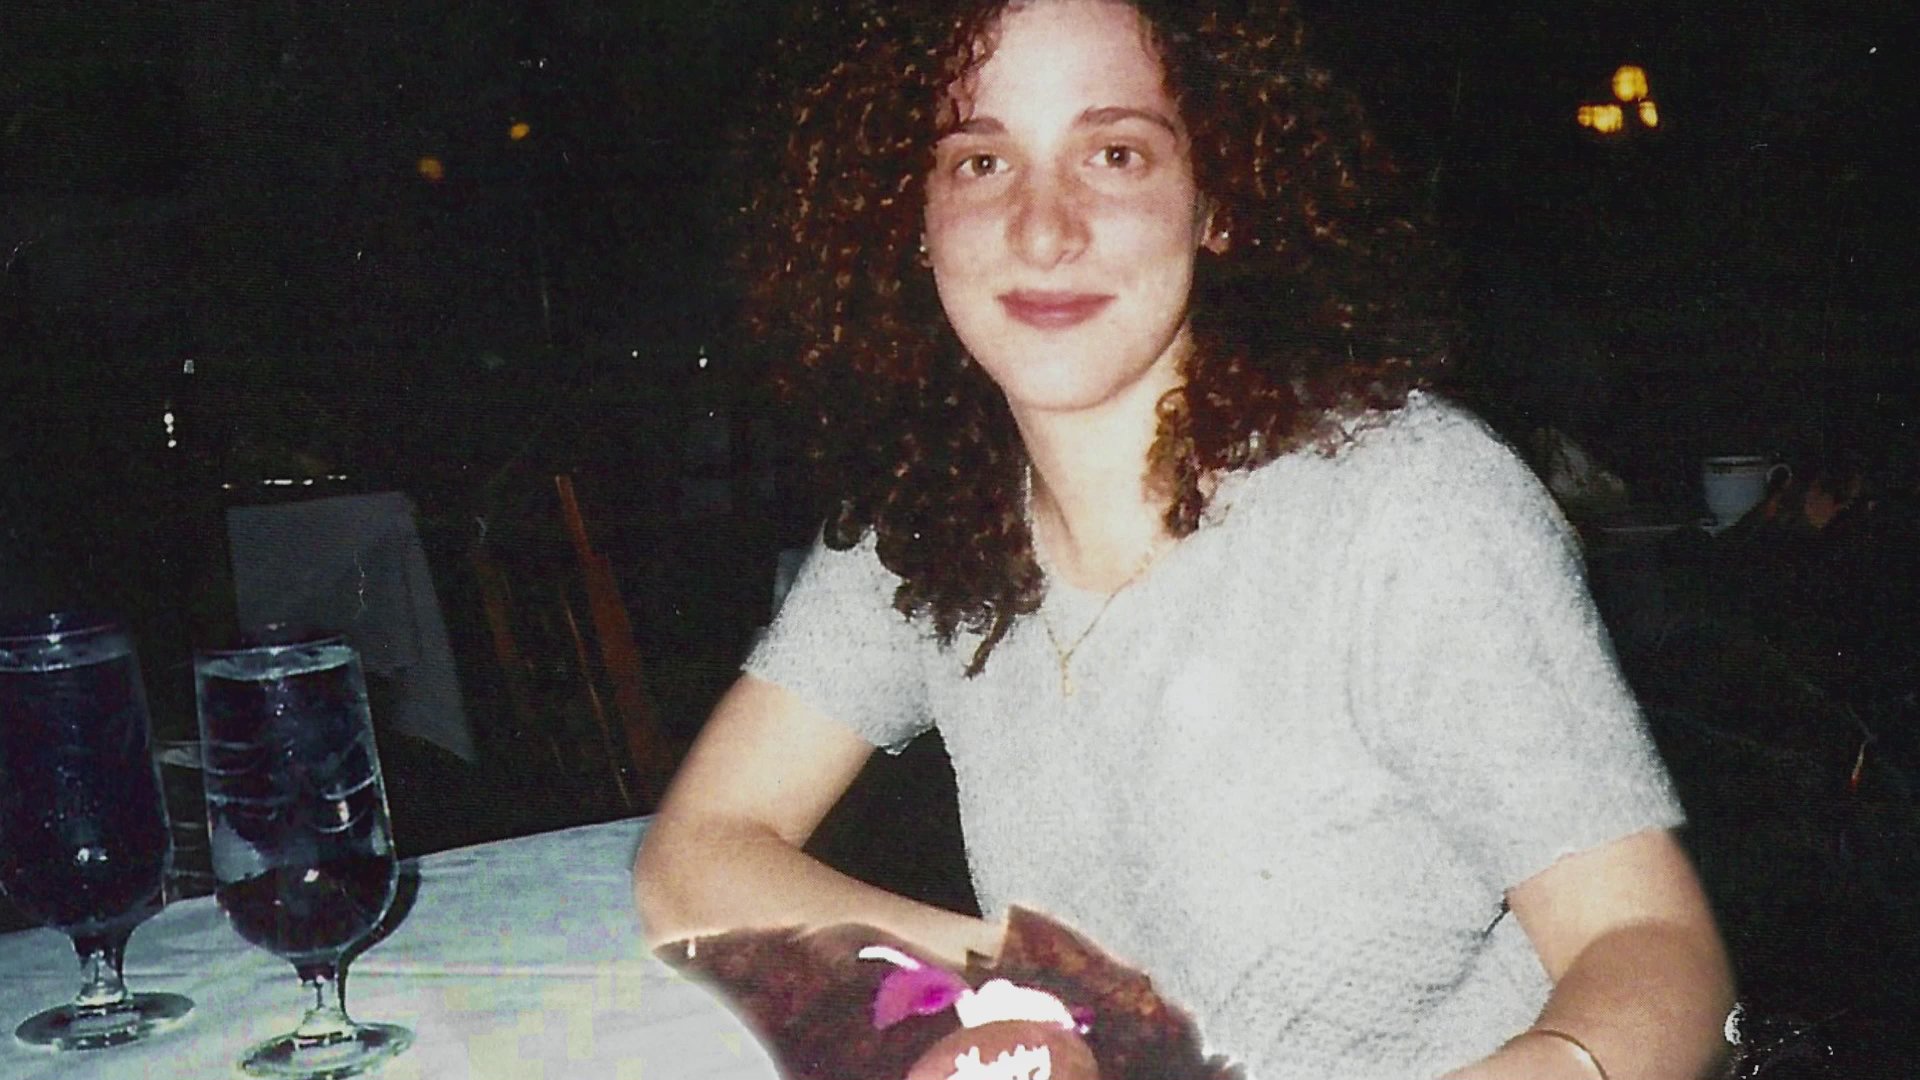 11 Things To Know About The Chandra Levy Murder | Crime News